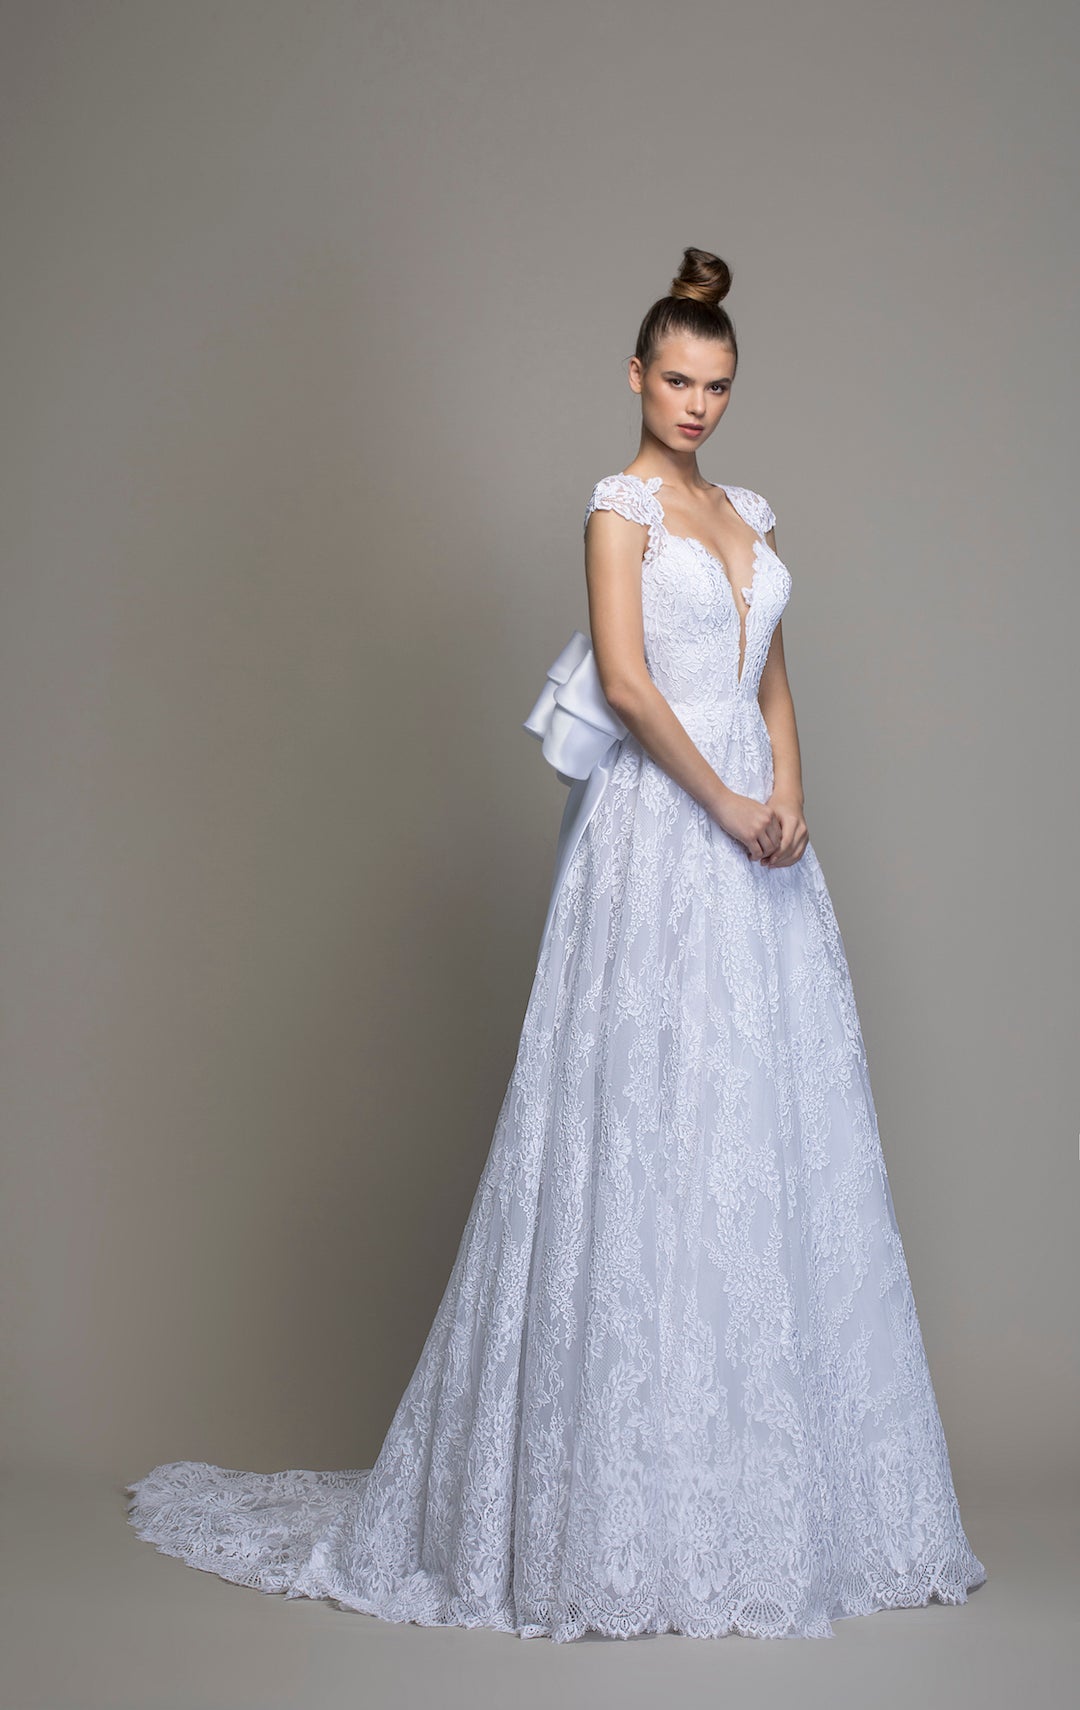 Pnina Tornai's new LOVE 2020 Collection is out! This is style 14769